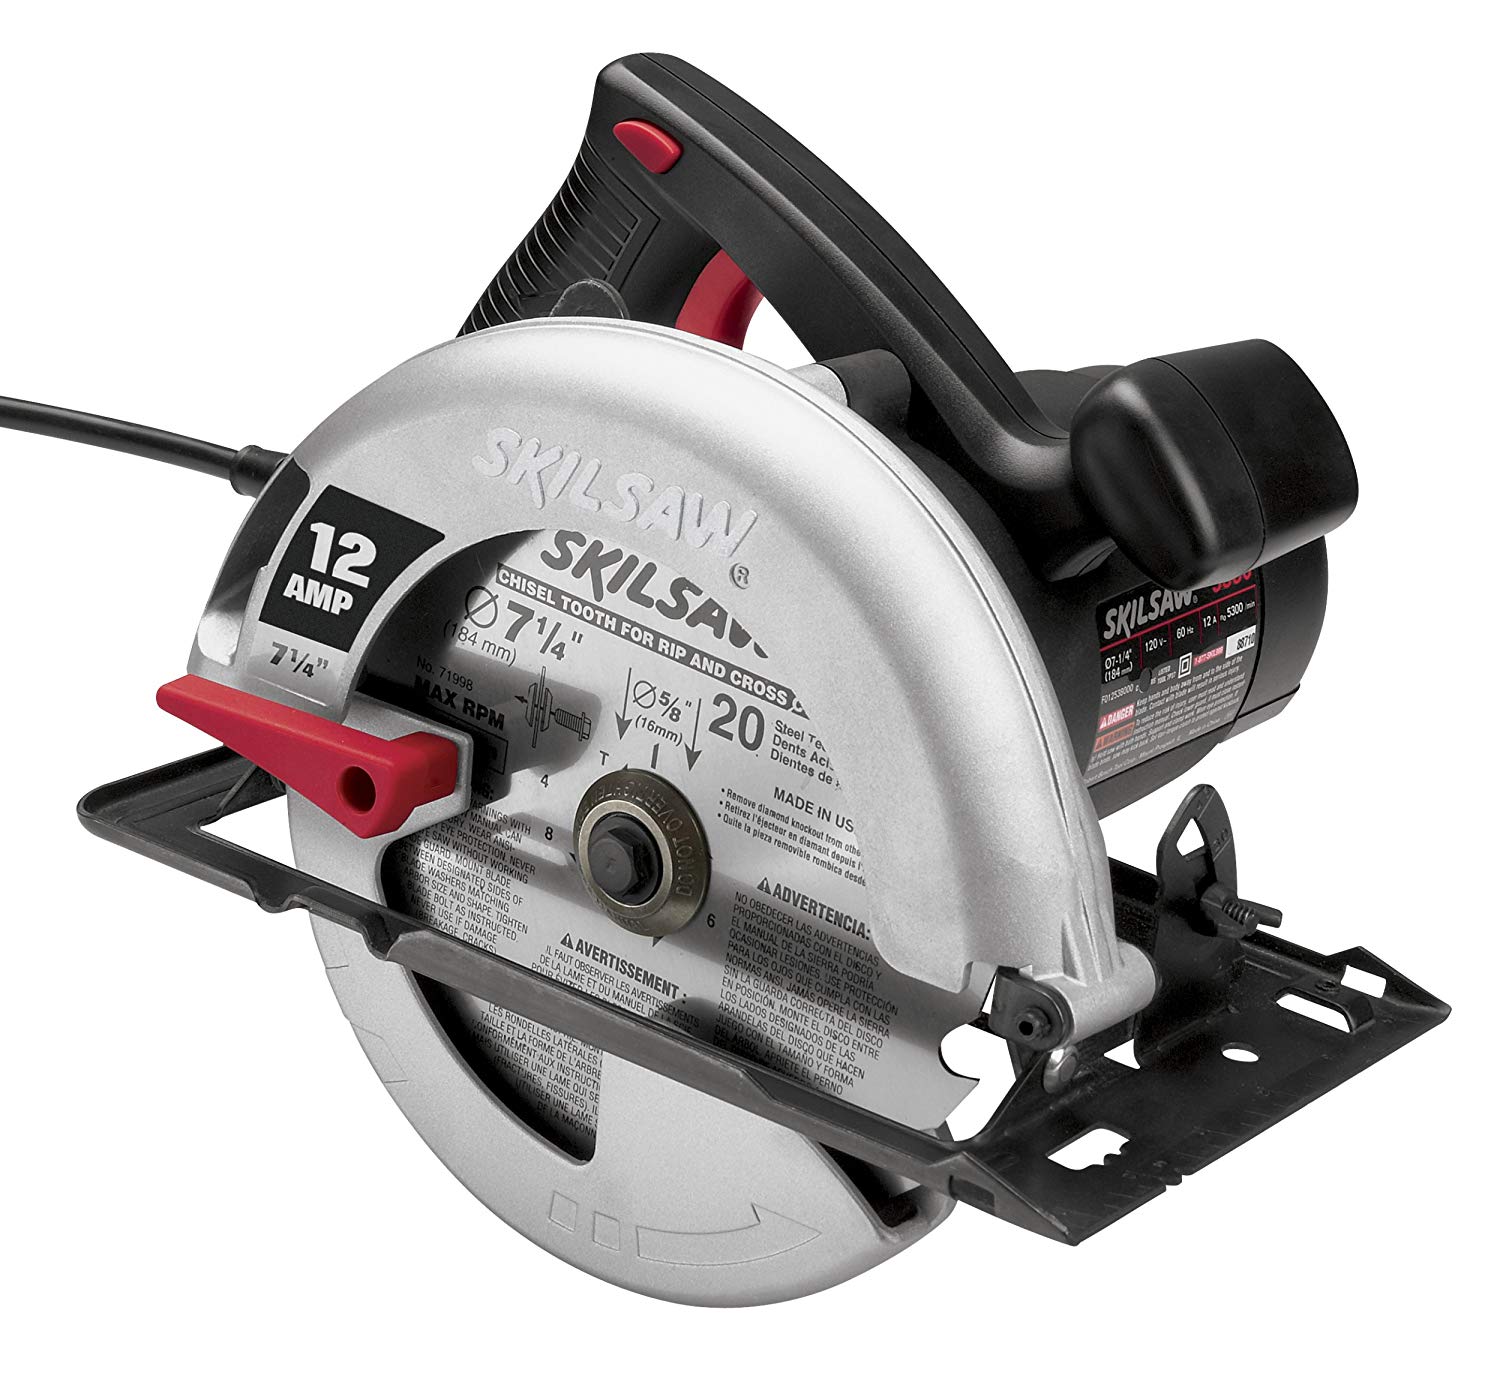 Factory-Reconditioned SKIL 5380-01-RT 7-1/4-Inch Circular Saw ...